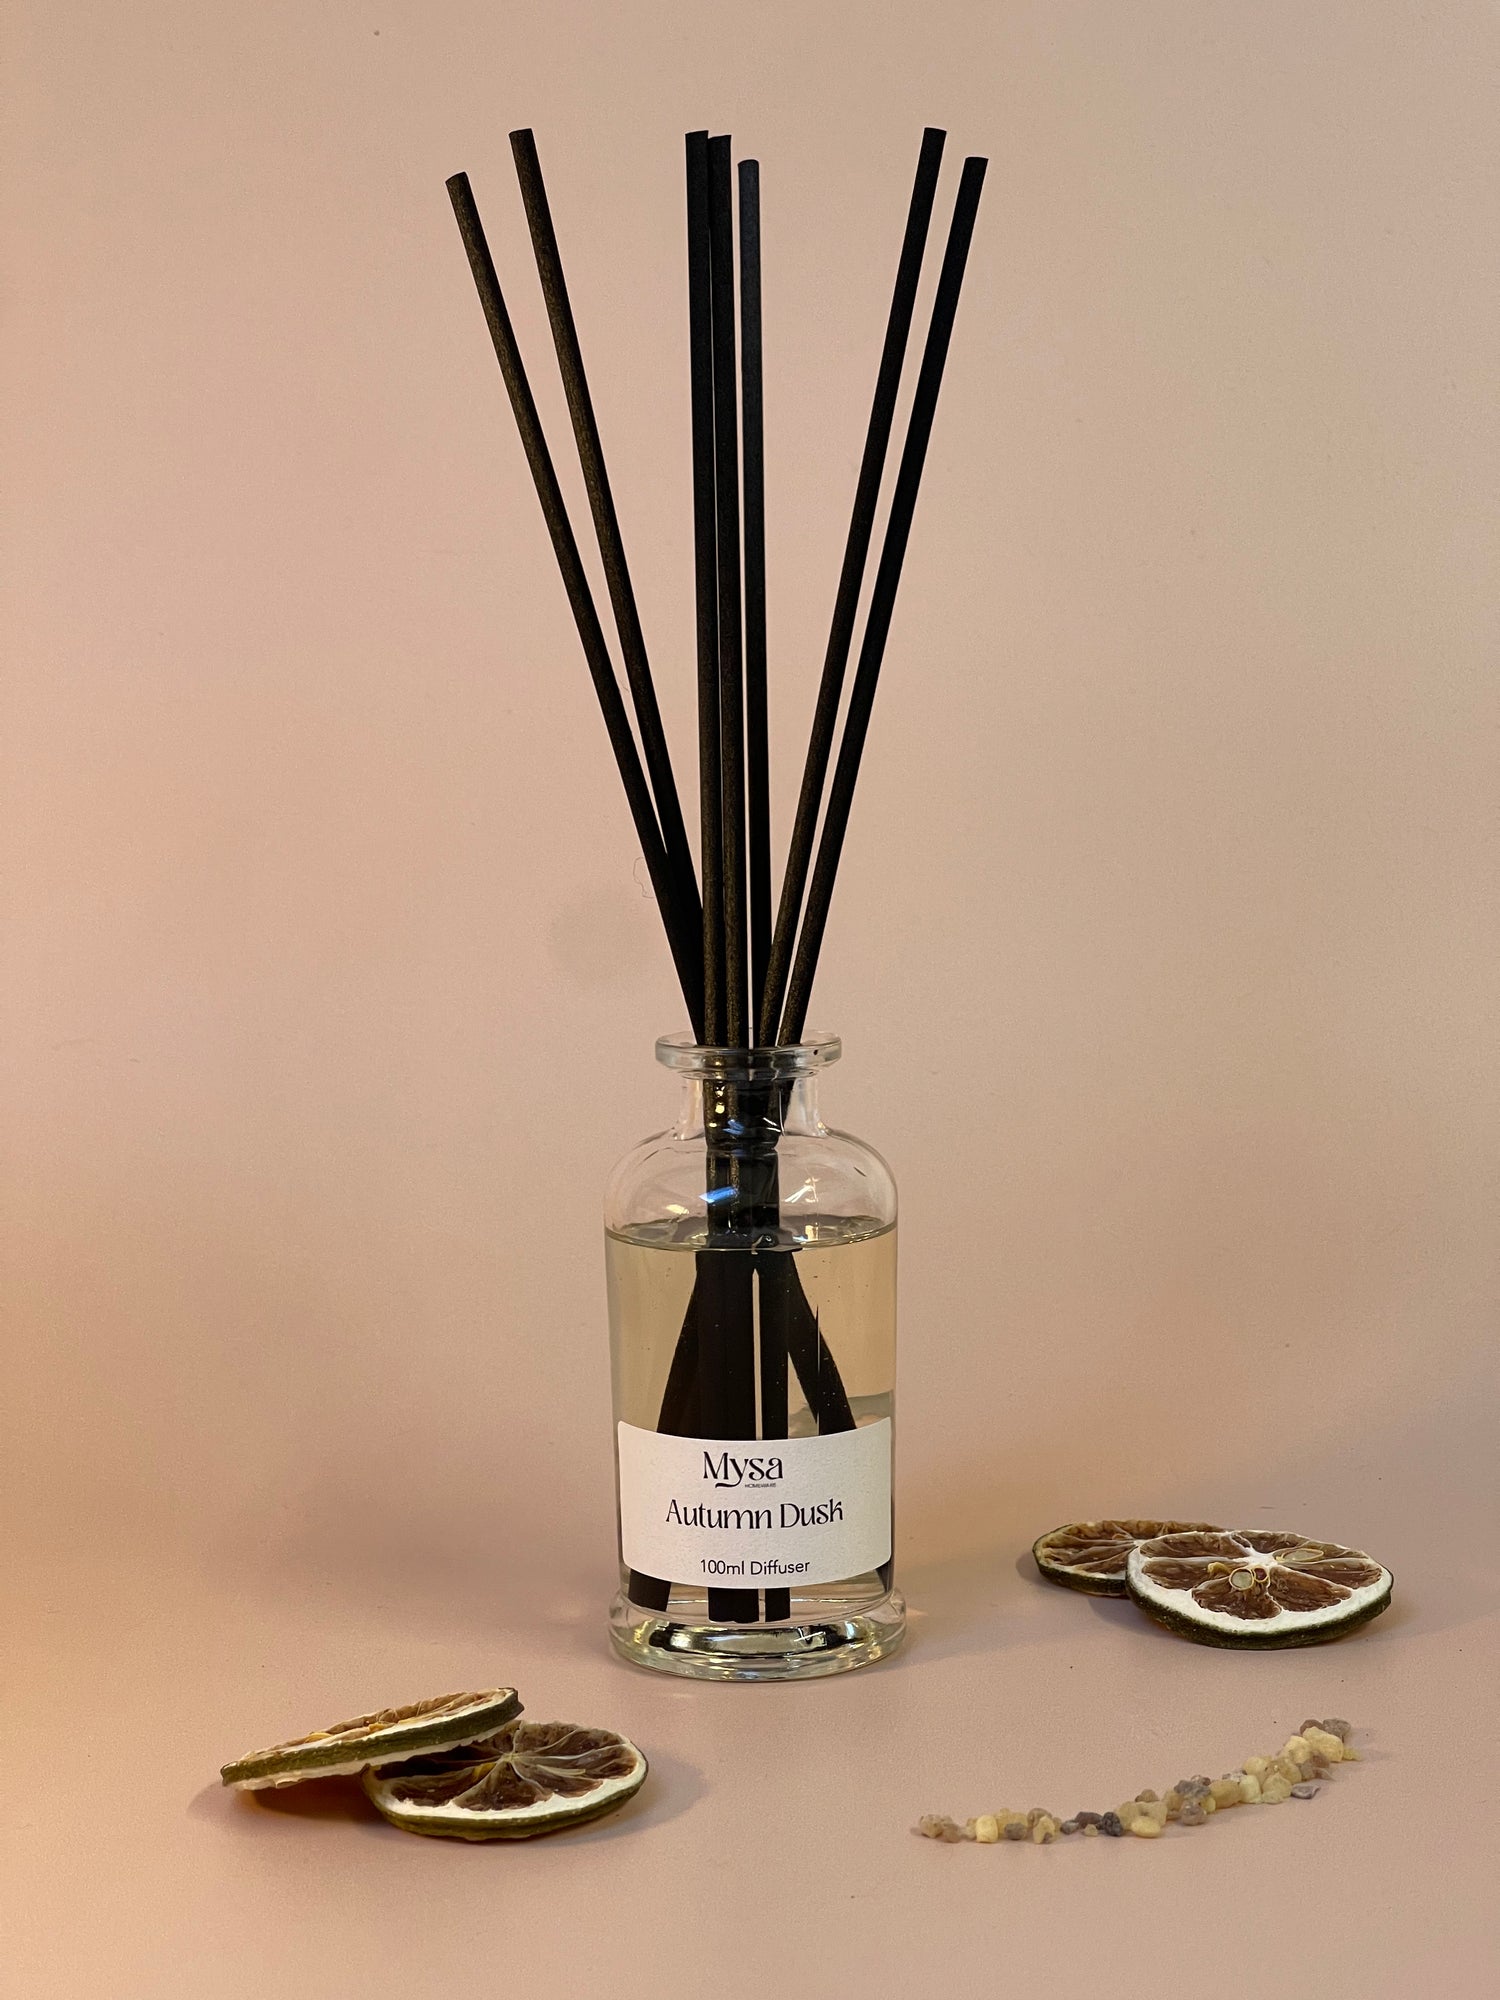 Autumn Dusk luxury reed diffuser in gift box, featuring a vegan base oil infused with frankincense &amp; bergamot fragrance.